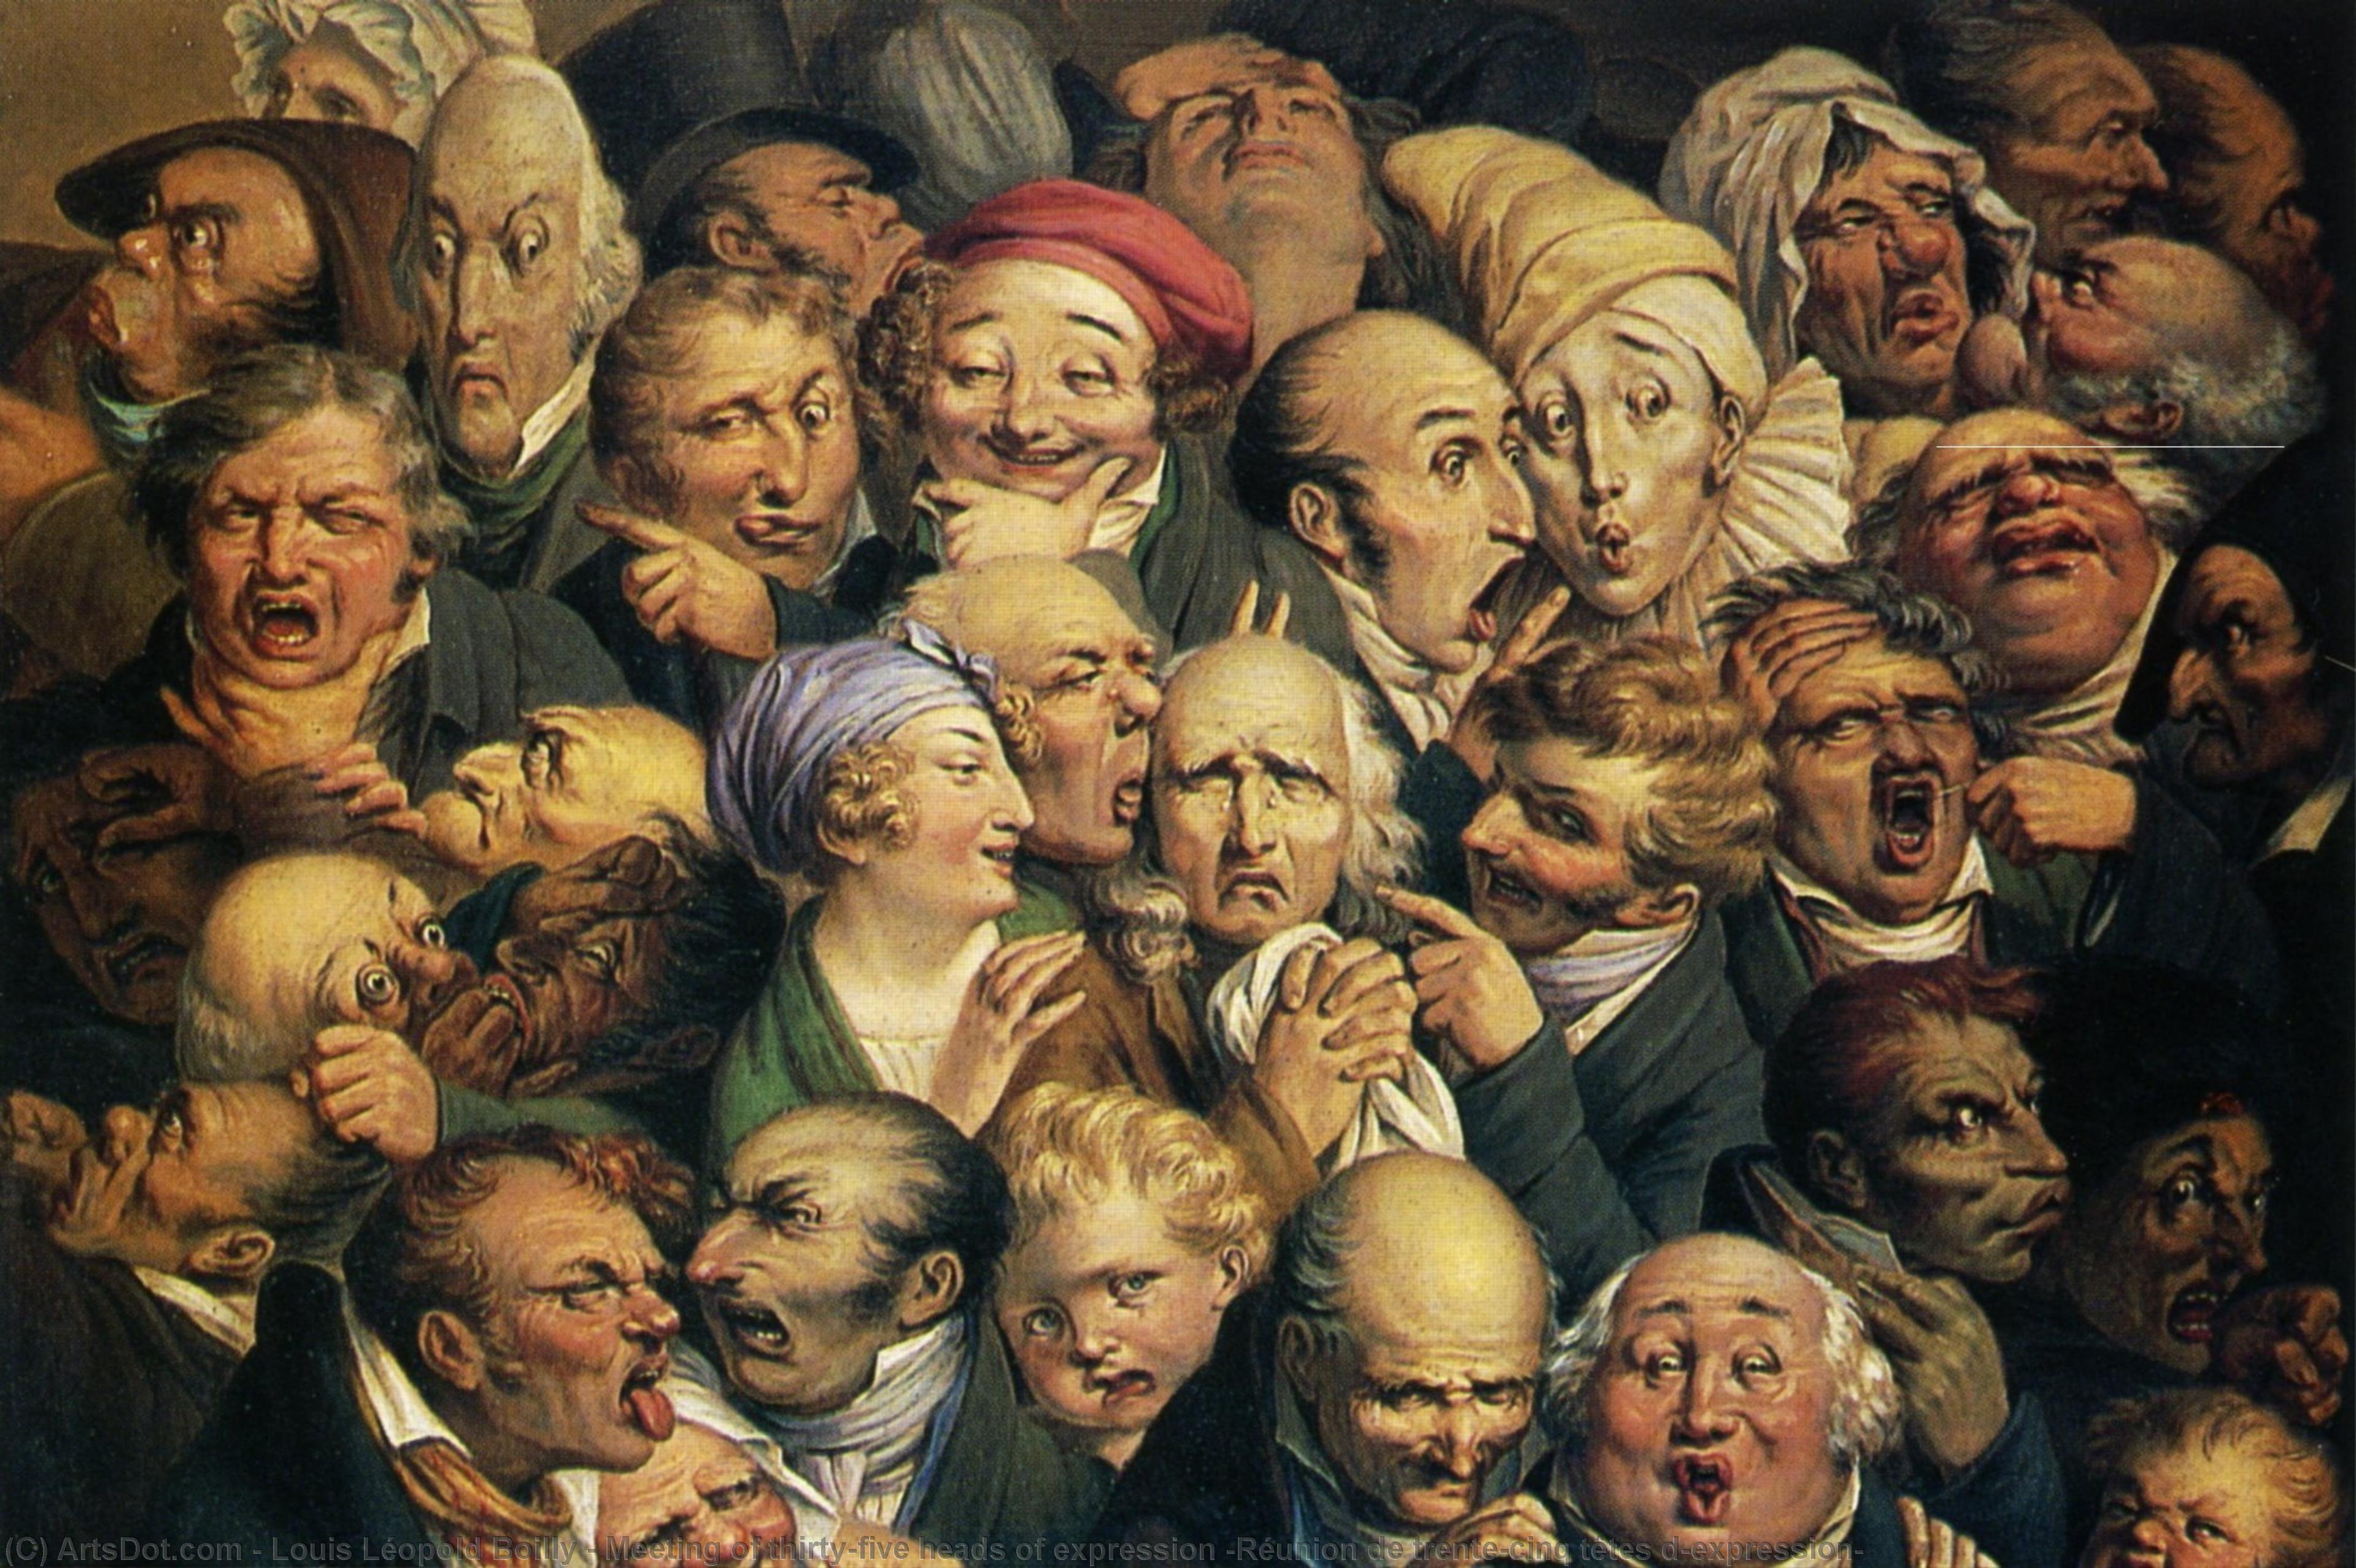 WikiOO.org - Encyclopedia of Fine Arts - Malba, Artwork Louis Léopold Boilly - Meeting of thirty-five heads of expression (Réunion de trente-cinq têtes d'expression)